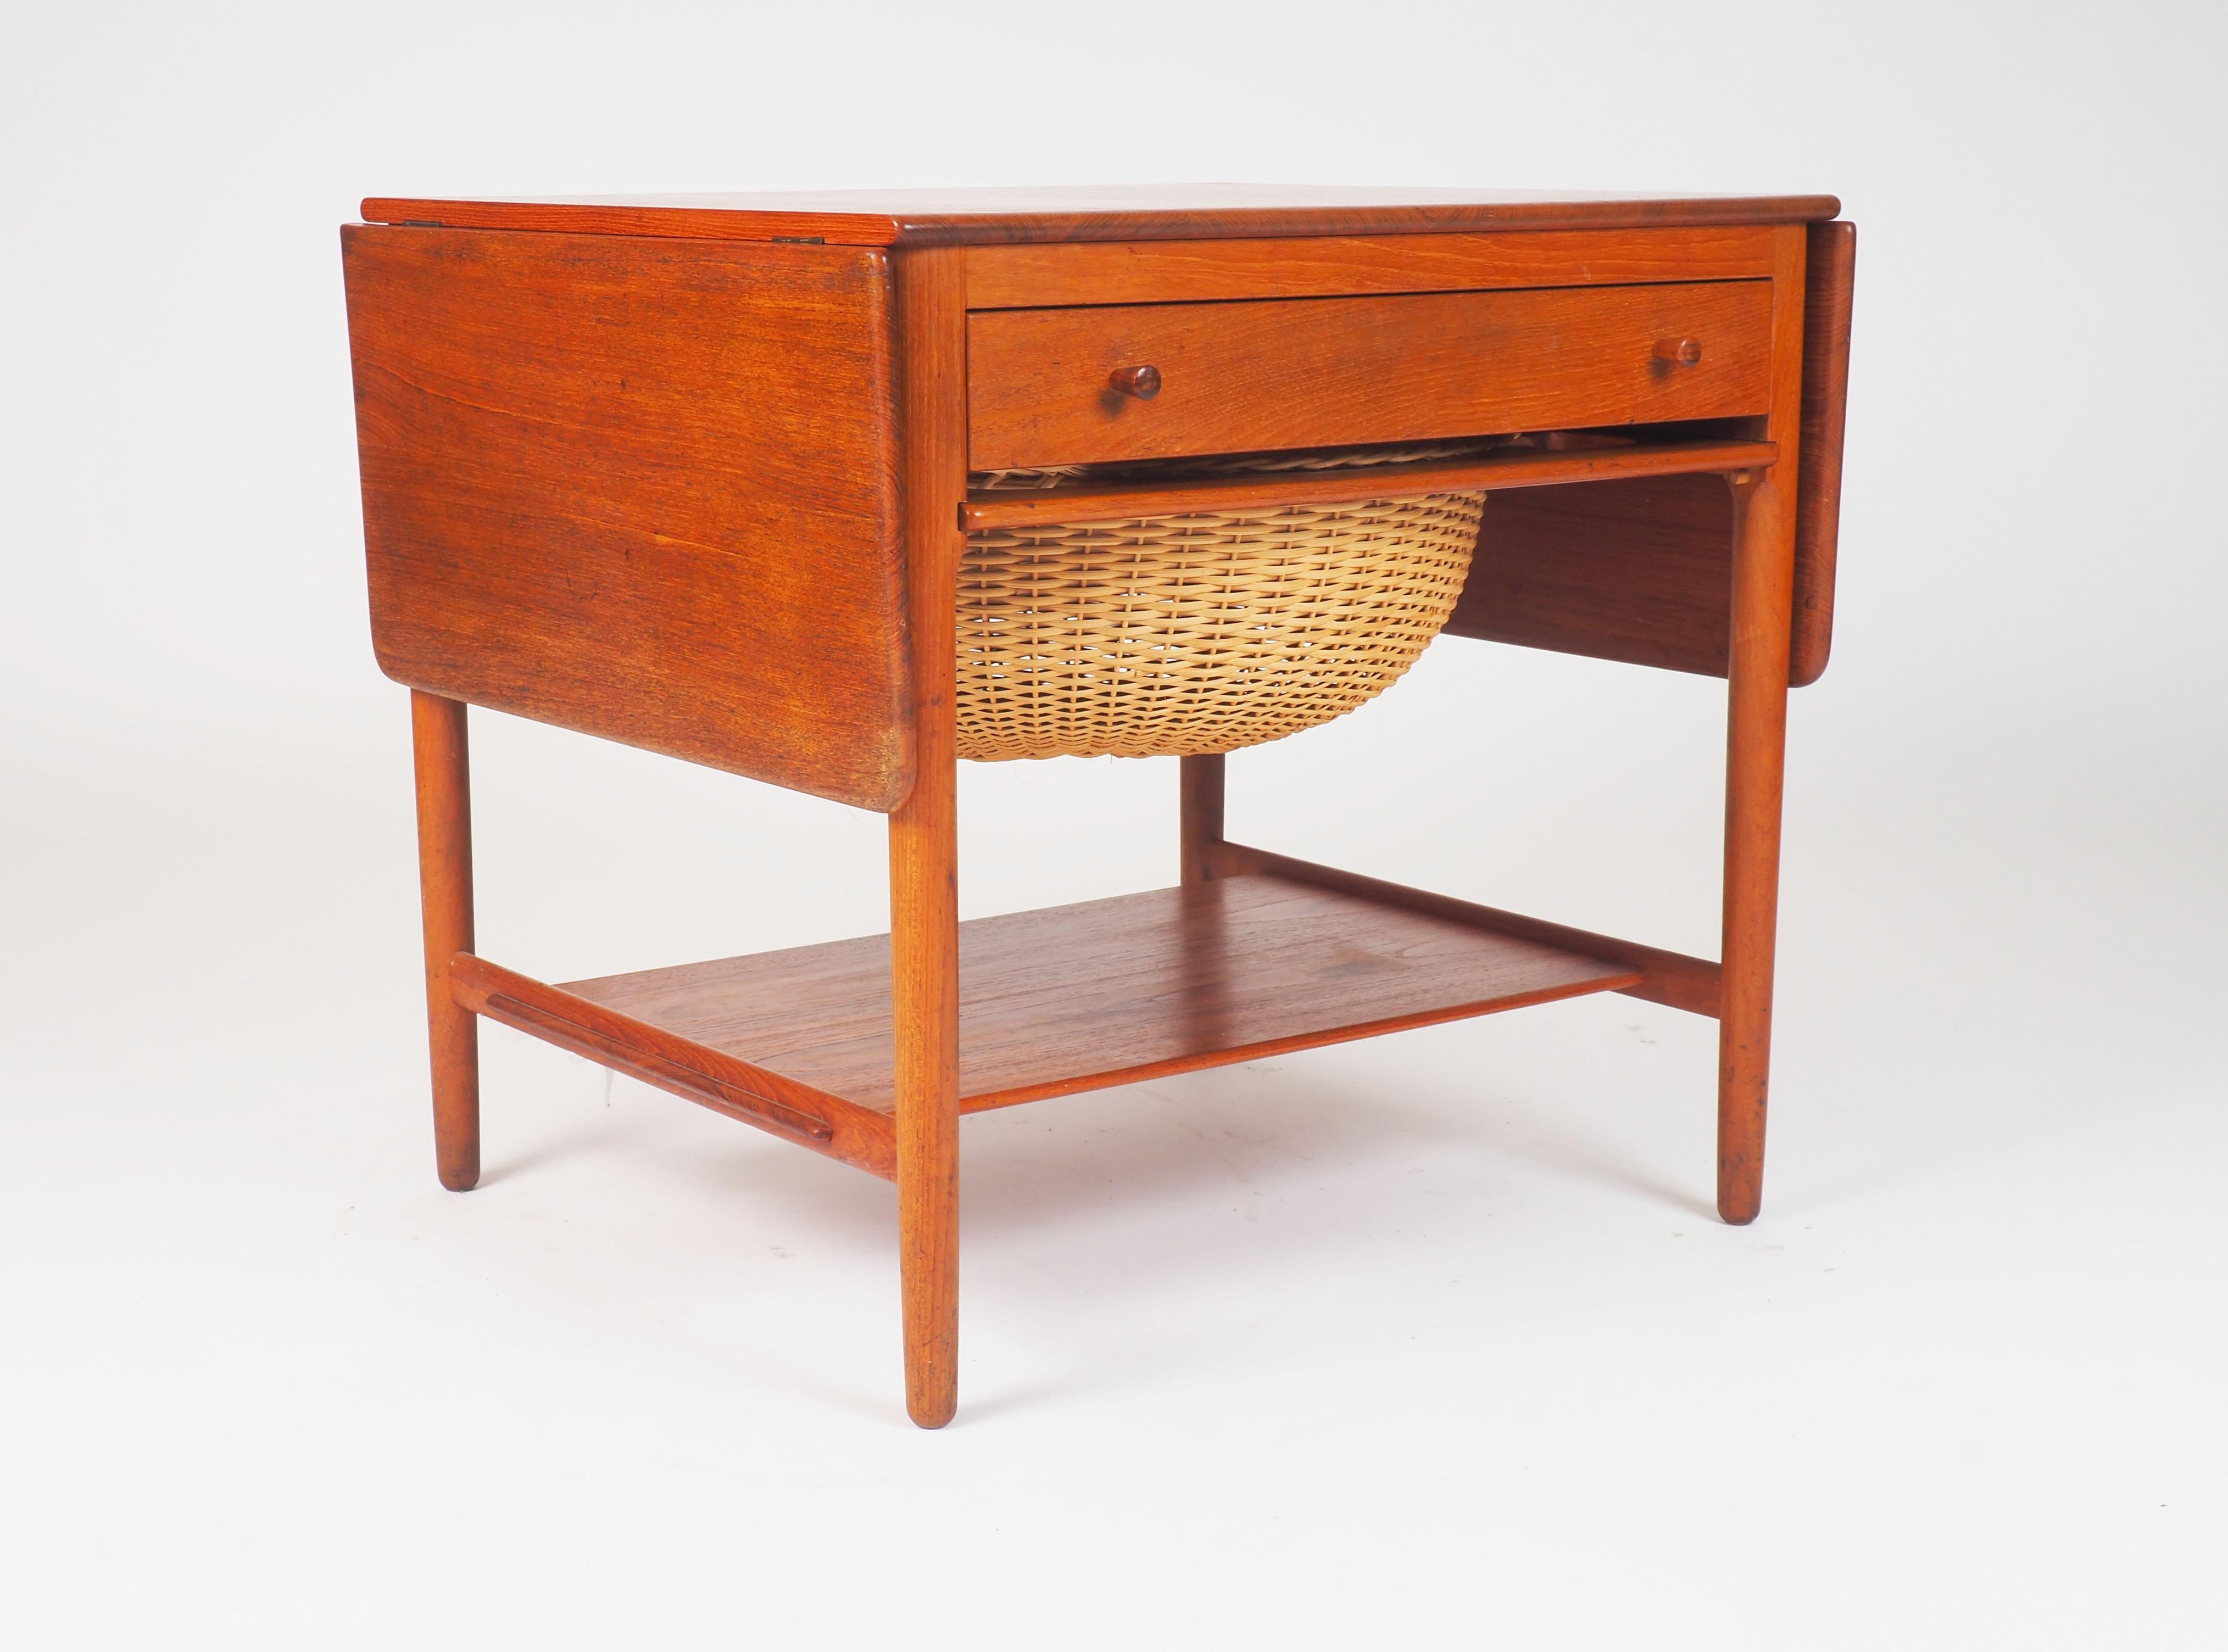 Sewing table in solid teak and oak, designed by Hans J Wegner and made by cabinetmaker Andreas Tuck. The table has two drop-leafs, a front drawer with several compartments and a handwoven rattan basket for knitting’s.